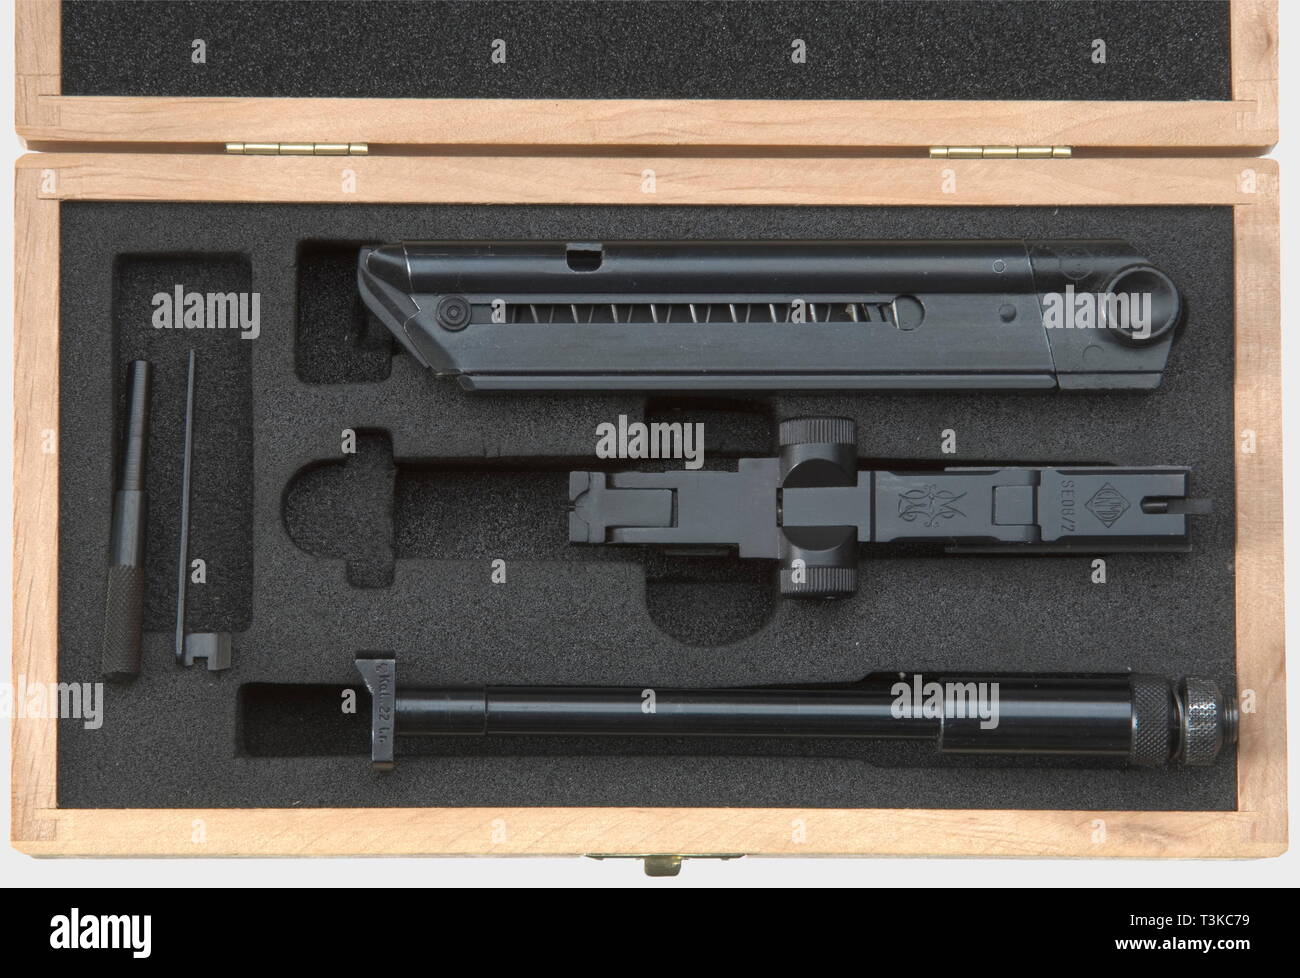 Small arms, pistols, Erma chanching system SE/08 for pistol 08, caliber .22, with box, Additional-Rights-Clearance-Info-Not-Available Stock Photo